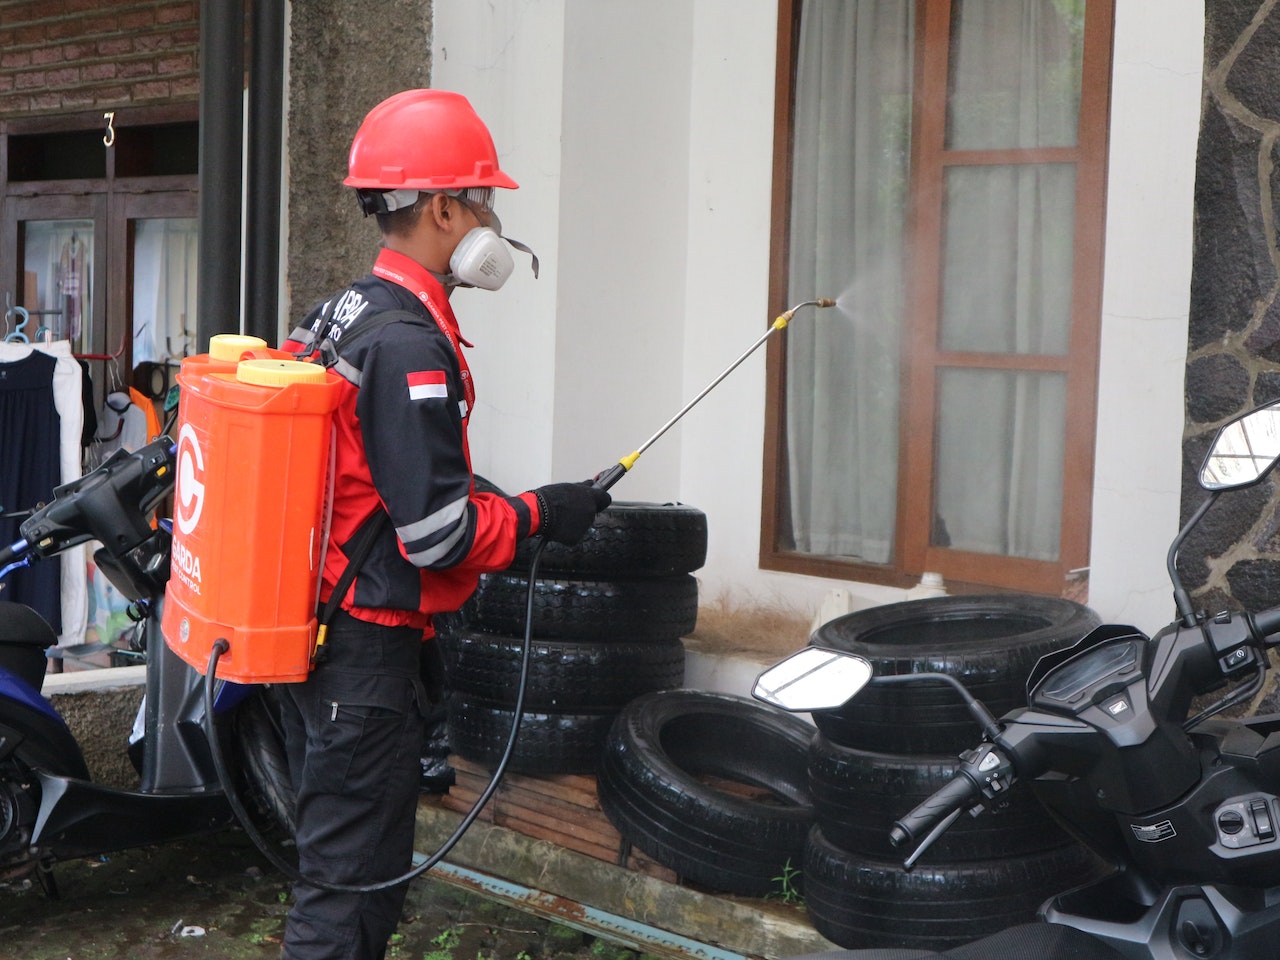 8 Crucial Questions to Ask Before Hiring A Pest Control Company For Your Home